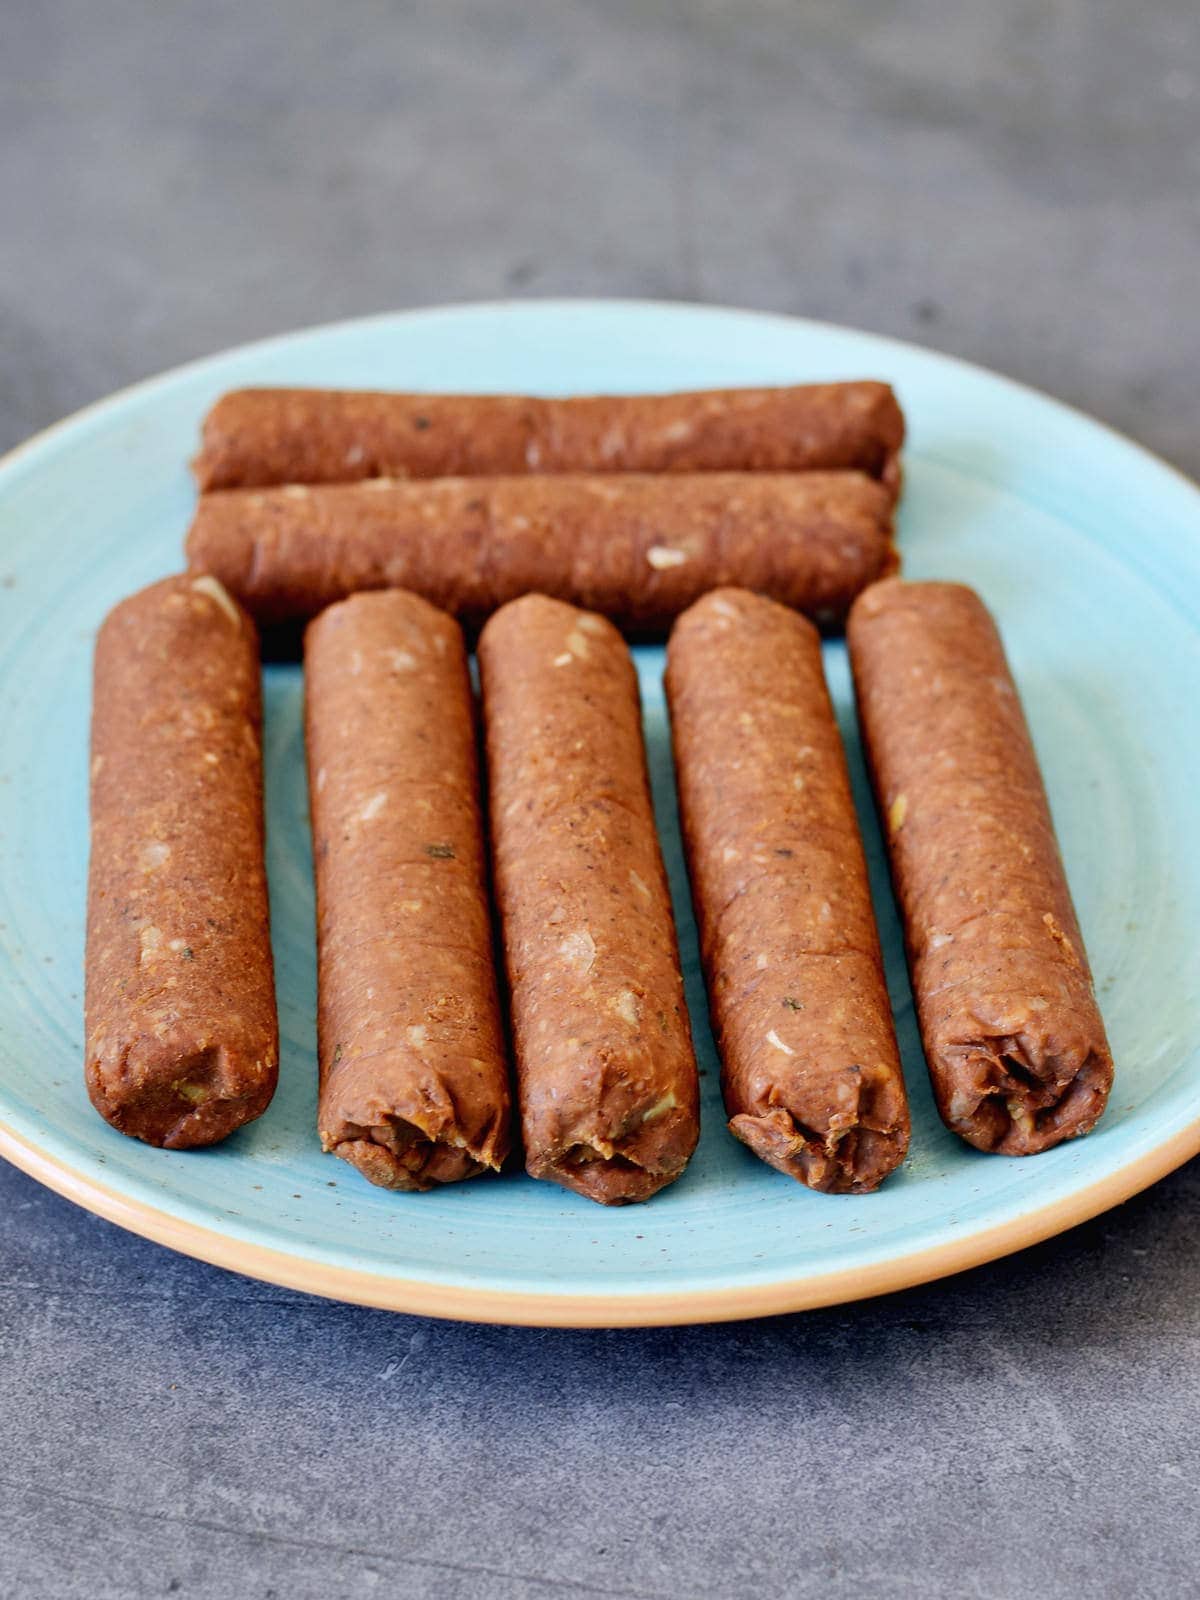 7 steamed vegan sausages on a plate